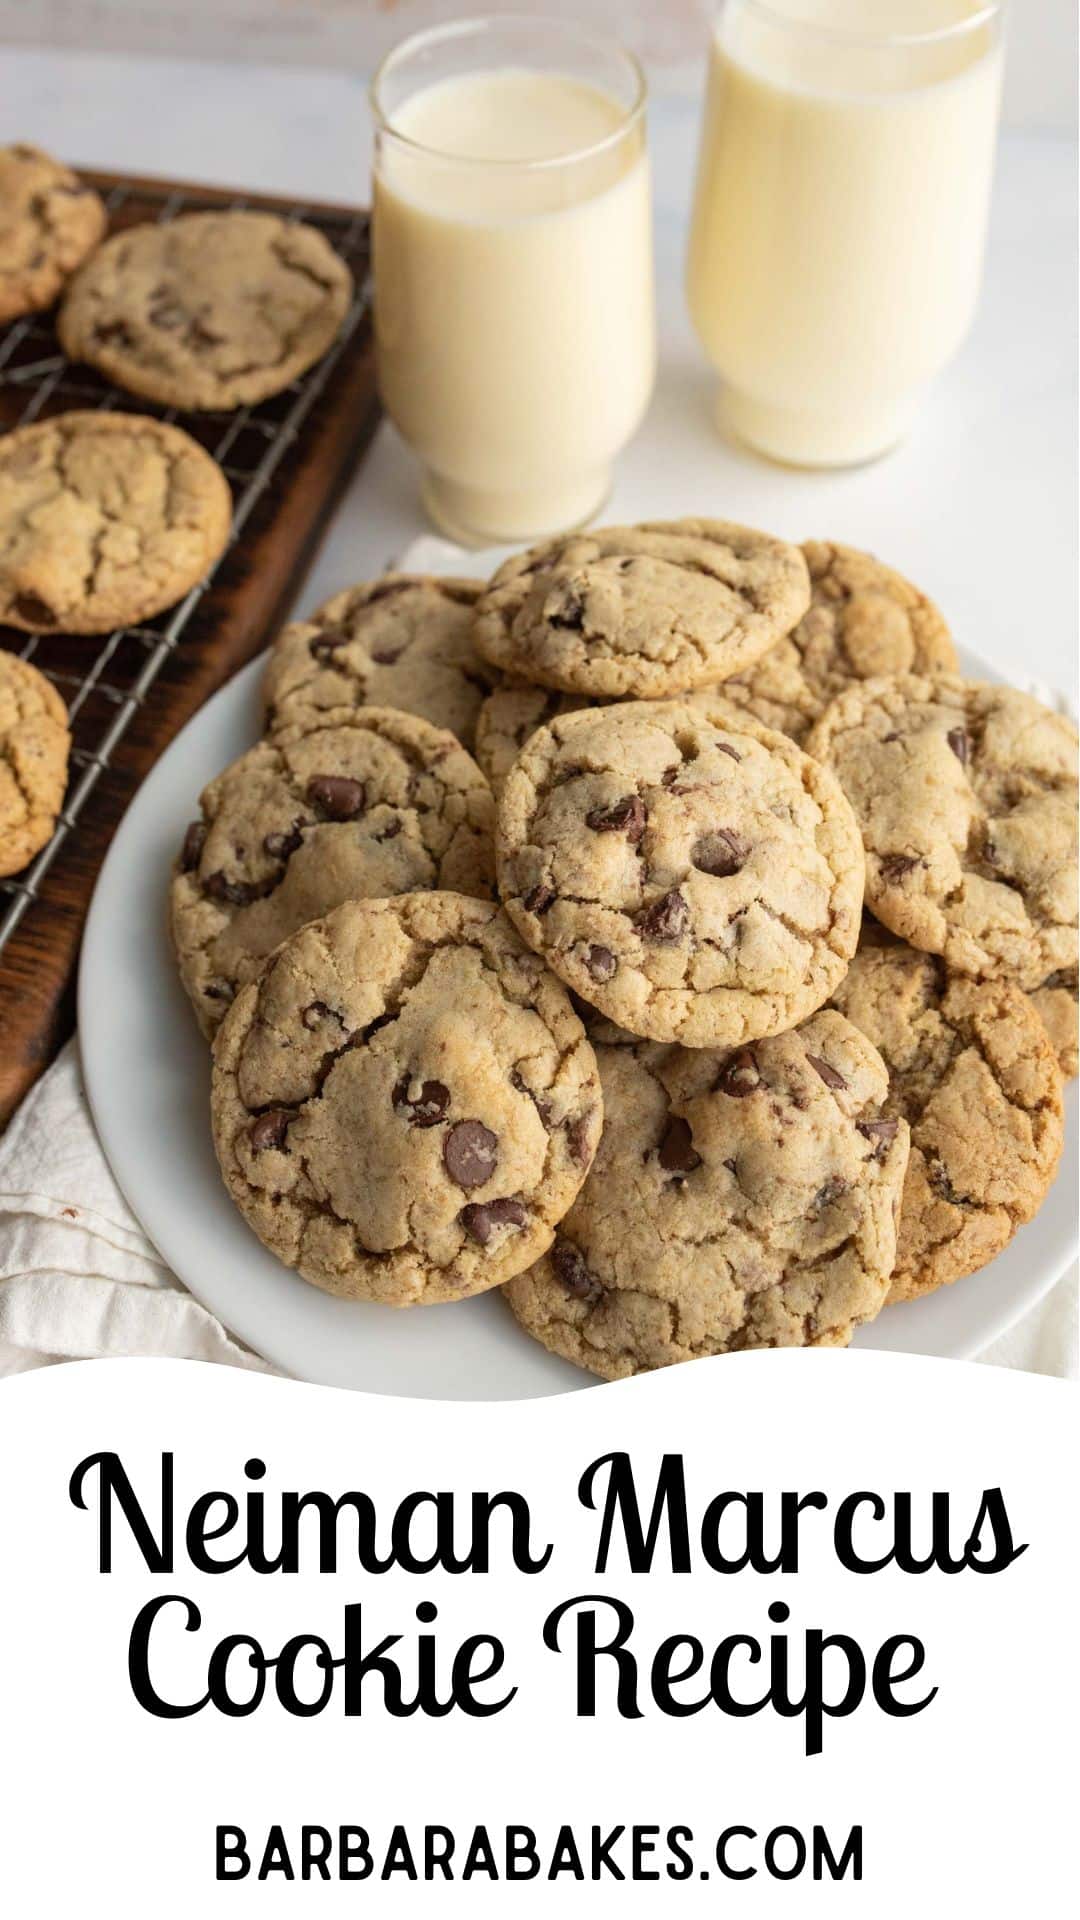 The famous Neiman Marcus Cookie Recipe! Blended oatmeal and a grated chocolate bar make this cookie extra special! via @barbarabakes